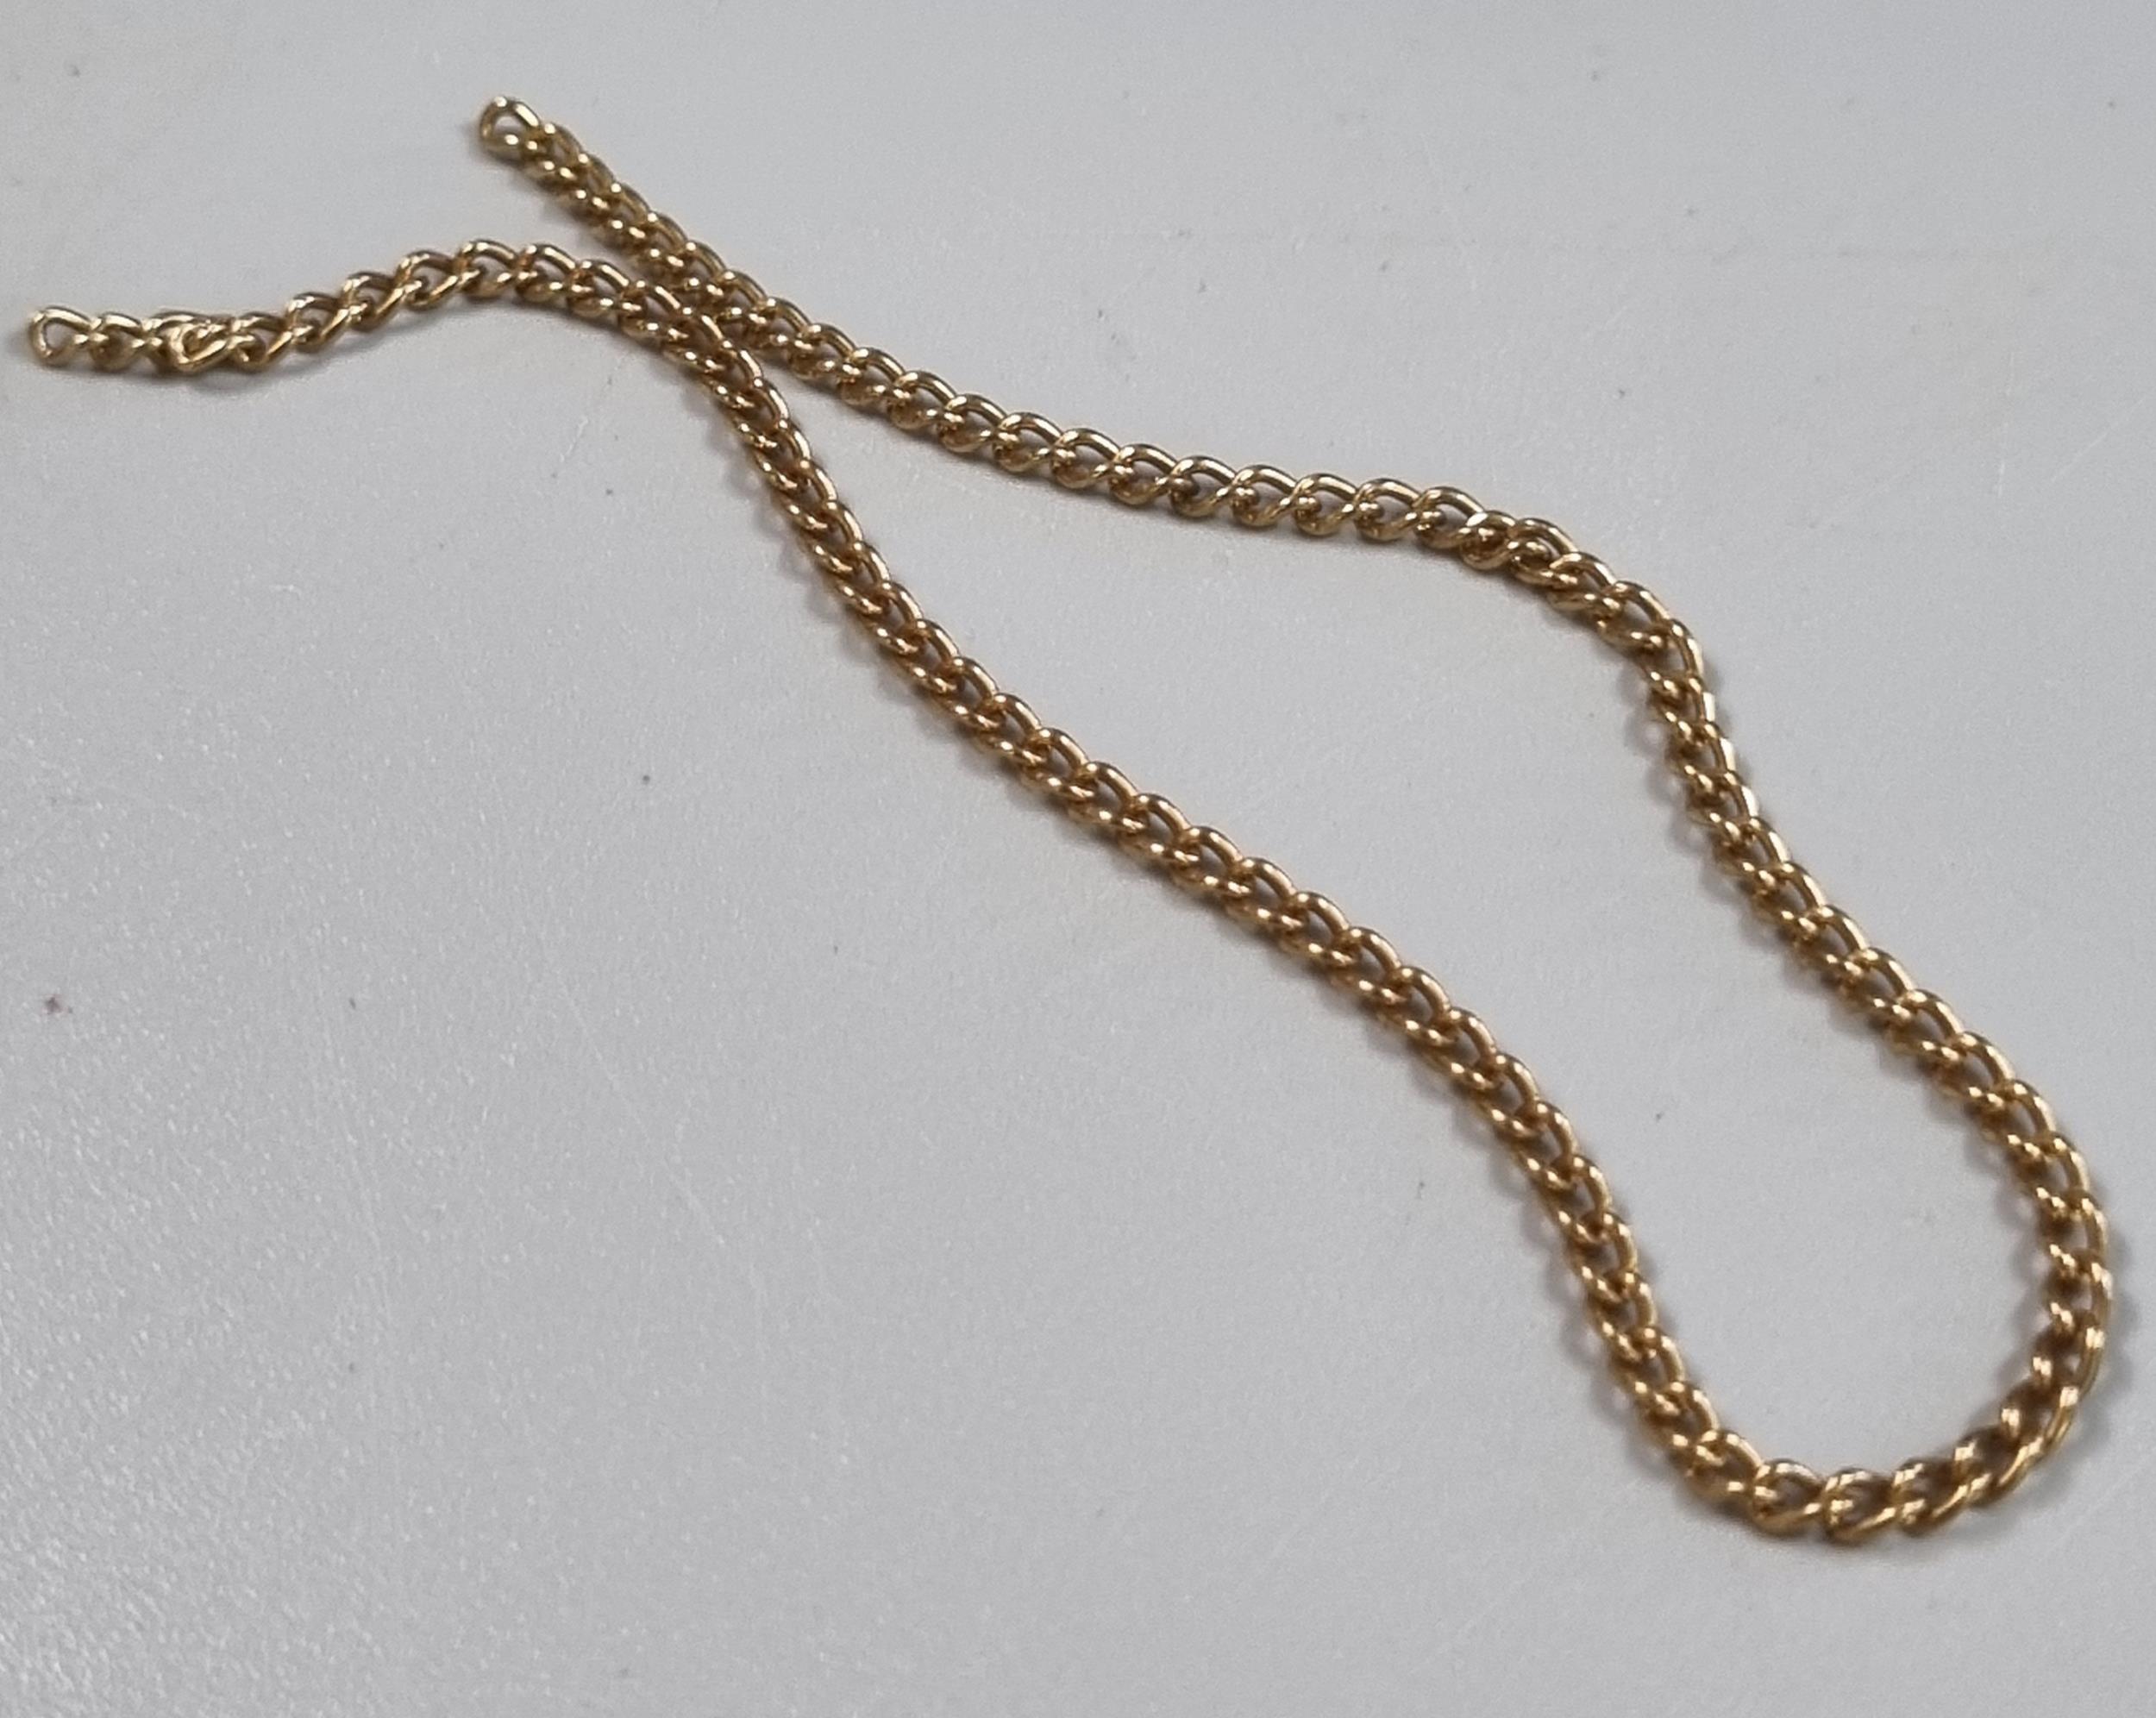 9ct gold fine chain with engraved locket marked 9ct back and front. Total weight 7.3g approx. - Image 3 of 4